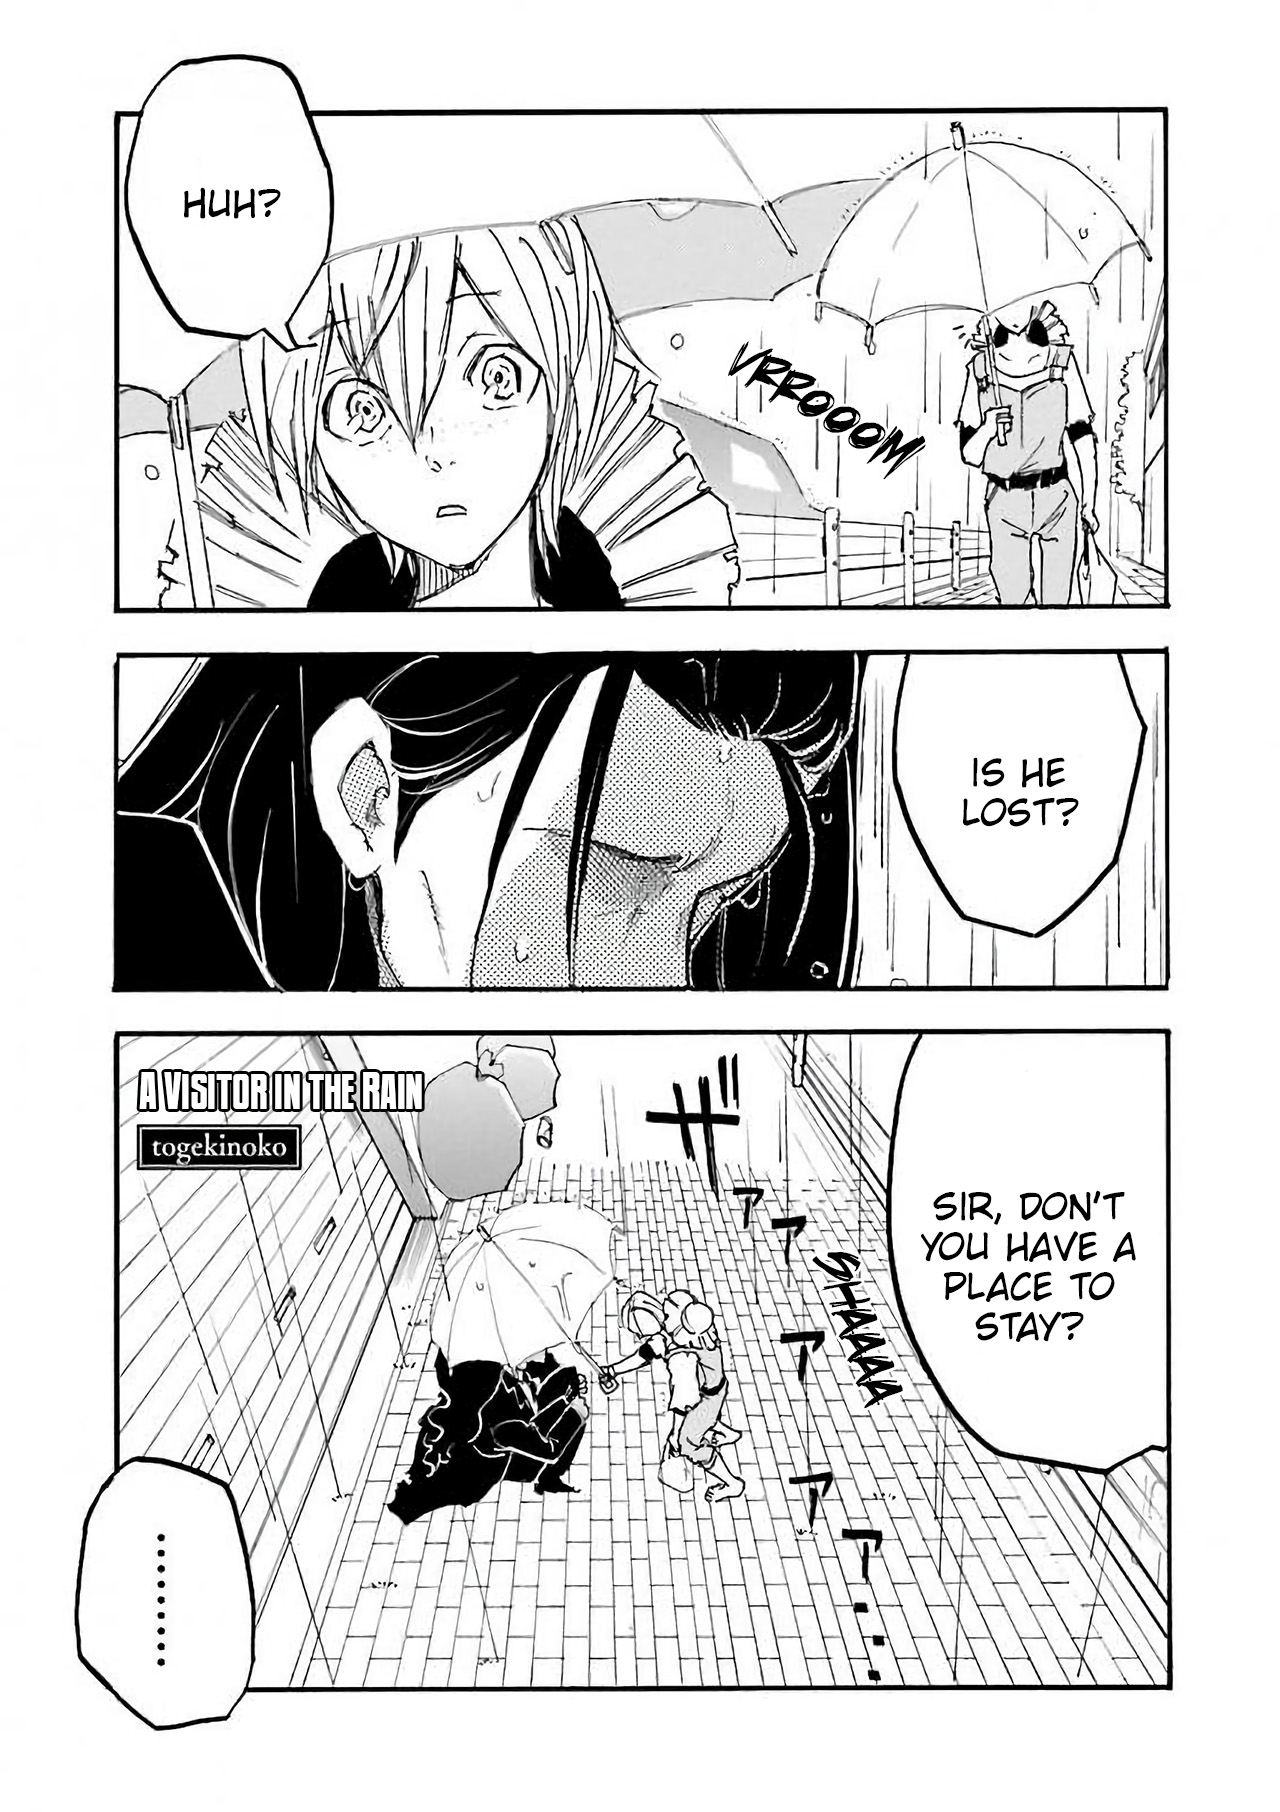 Bungou Stray Dogs Official Anthology Vol. 1 Ch. 7 A Visitor in the Rain